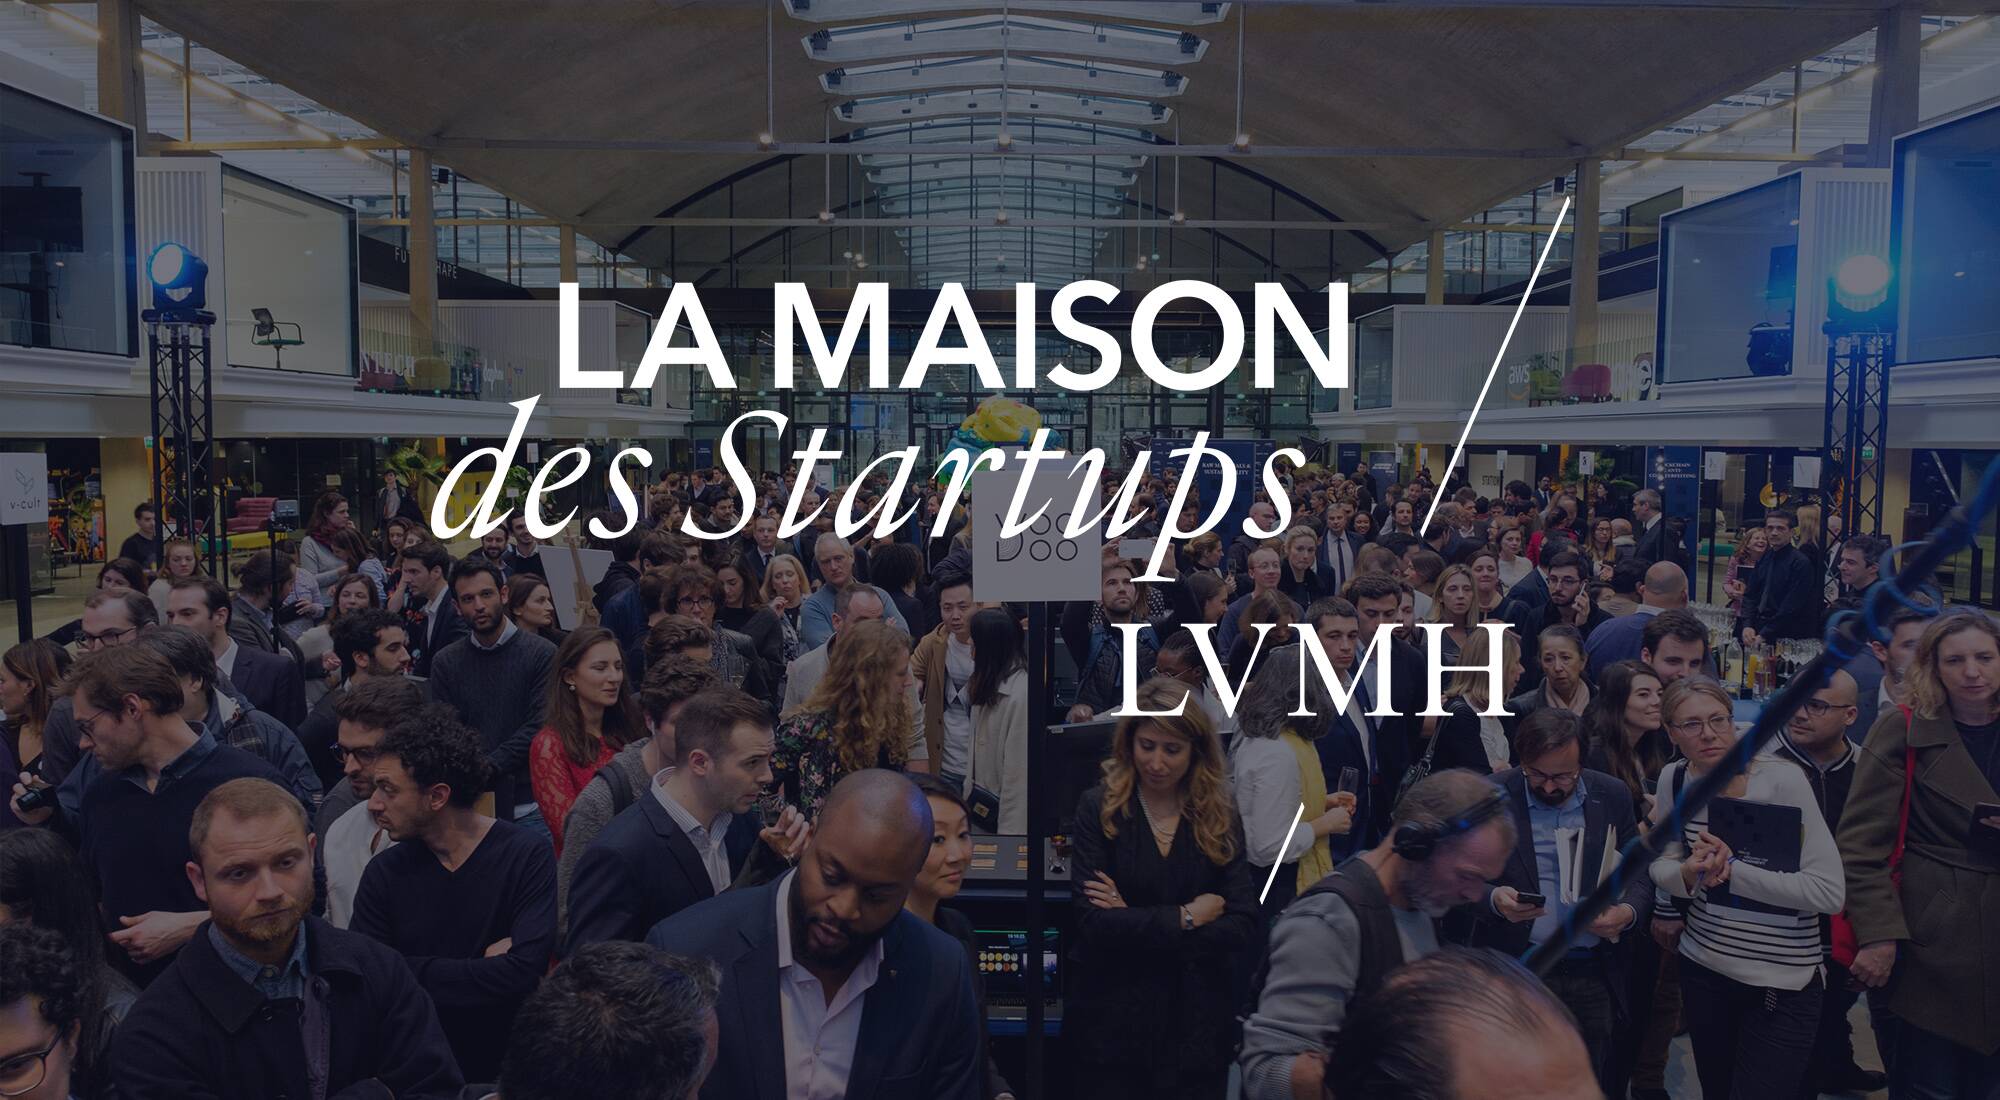 LVMH on X: #LVMH launches #INSIDELVMH, an immersive program for young  talents that deepens synergies between the academic and business worlds.  #LVMHtalents cc @CSM_news @Unibocconi @HECParis @essec @centralesupelec  @IfmParis  / X